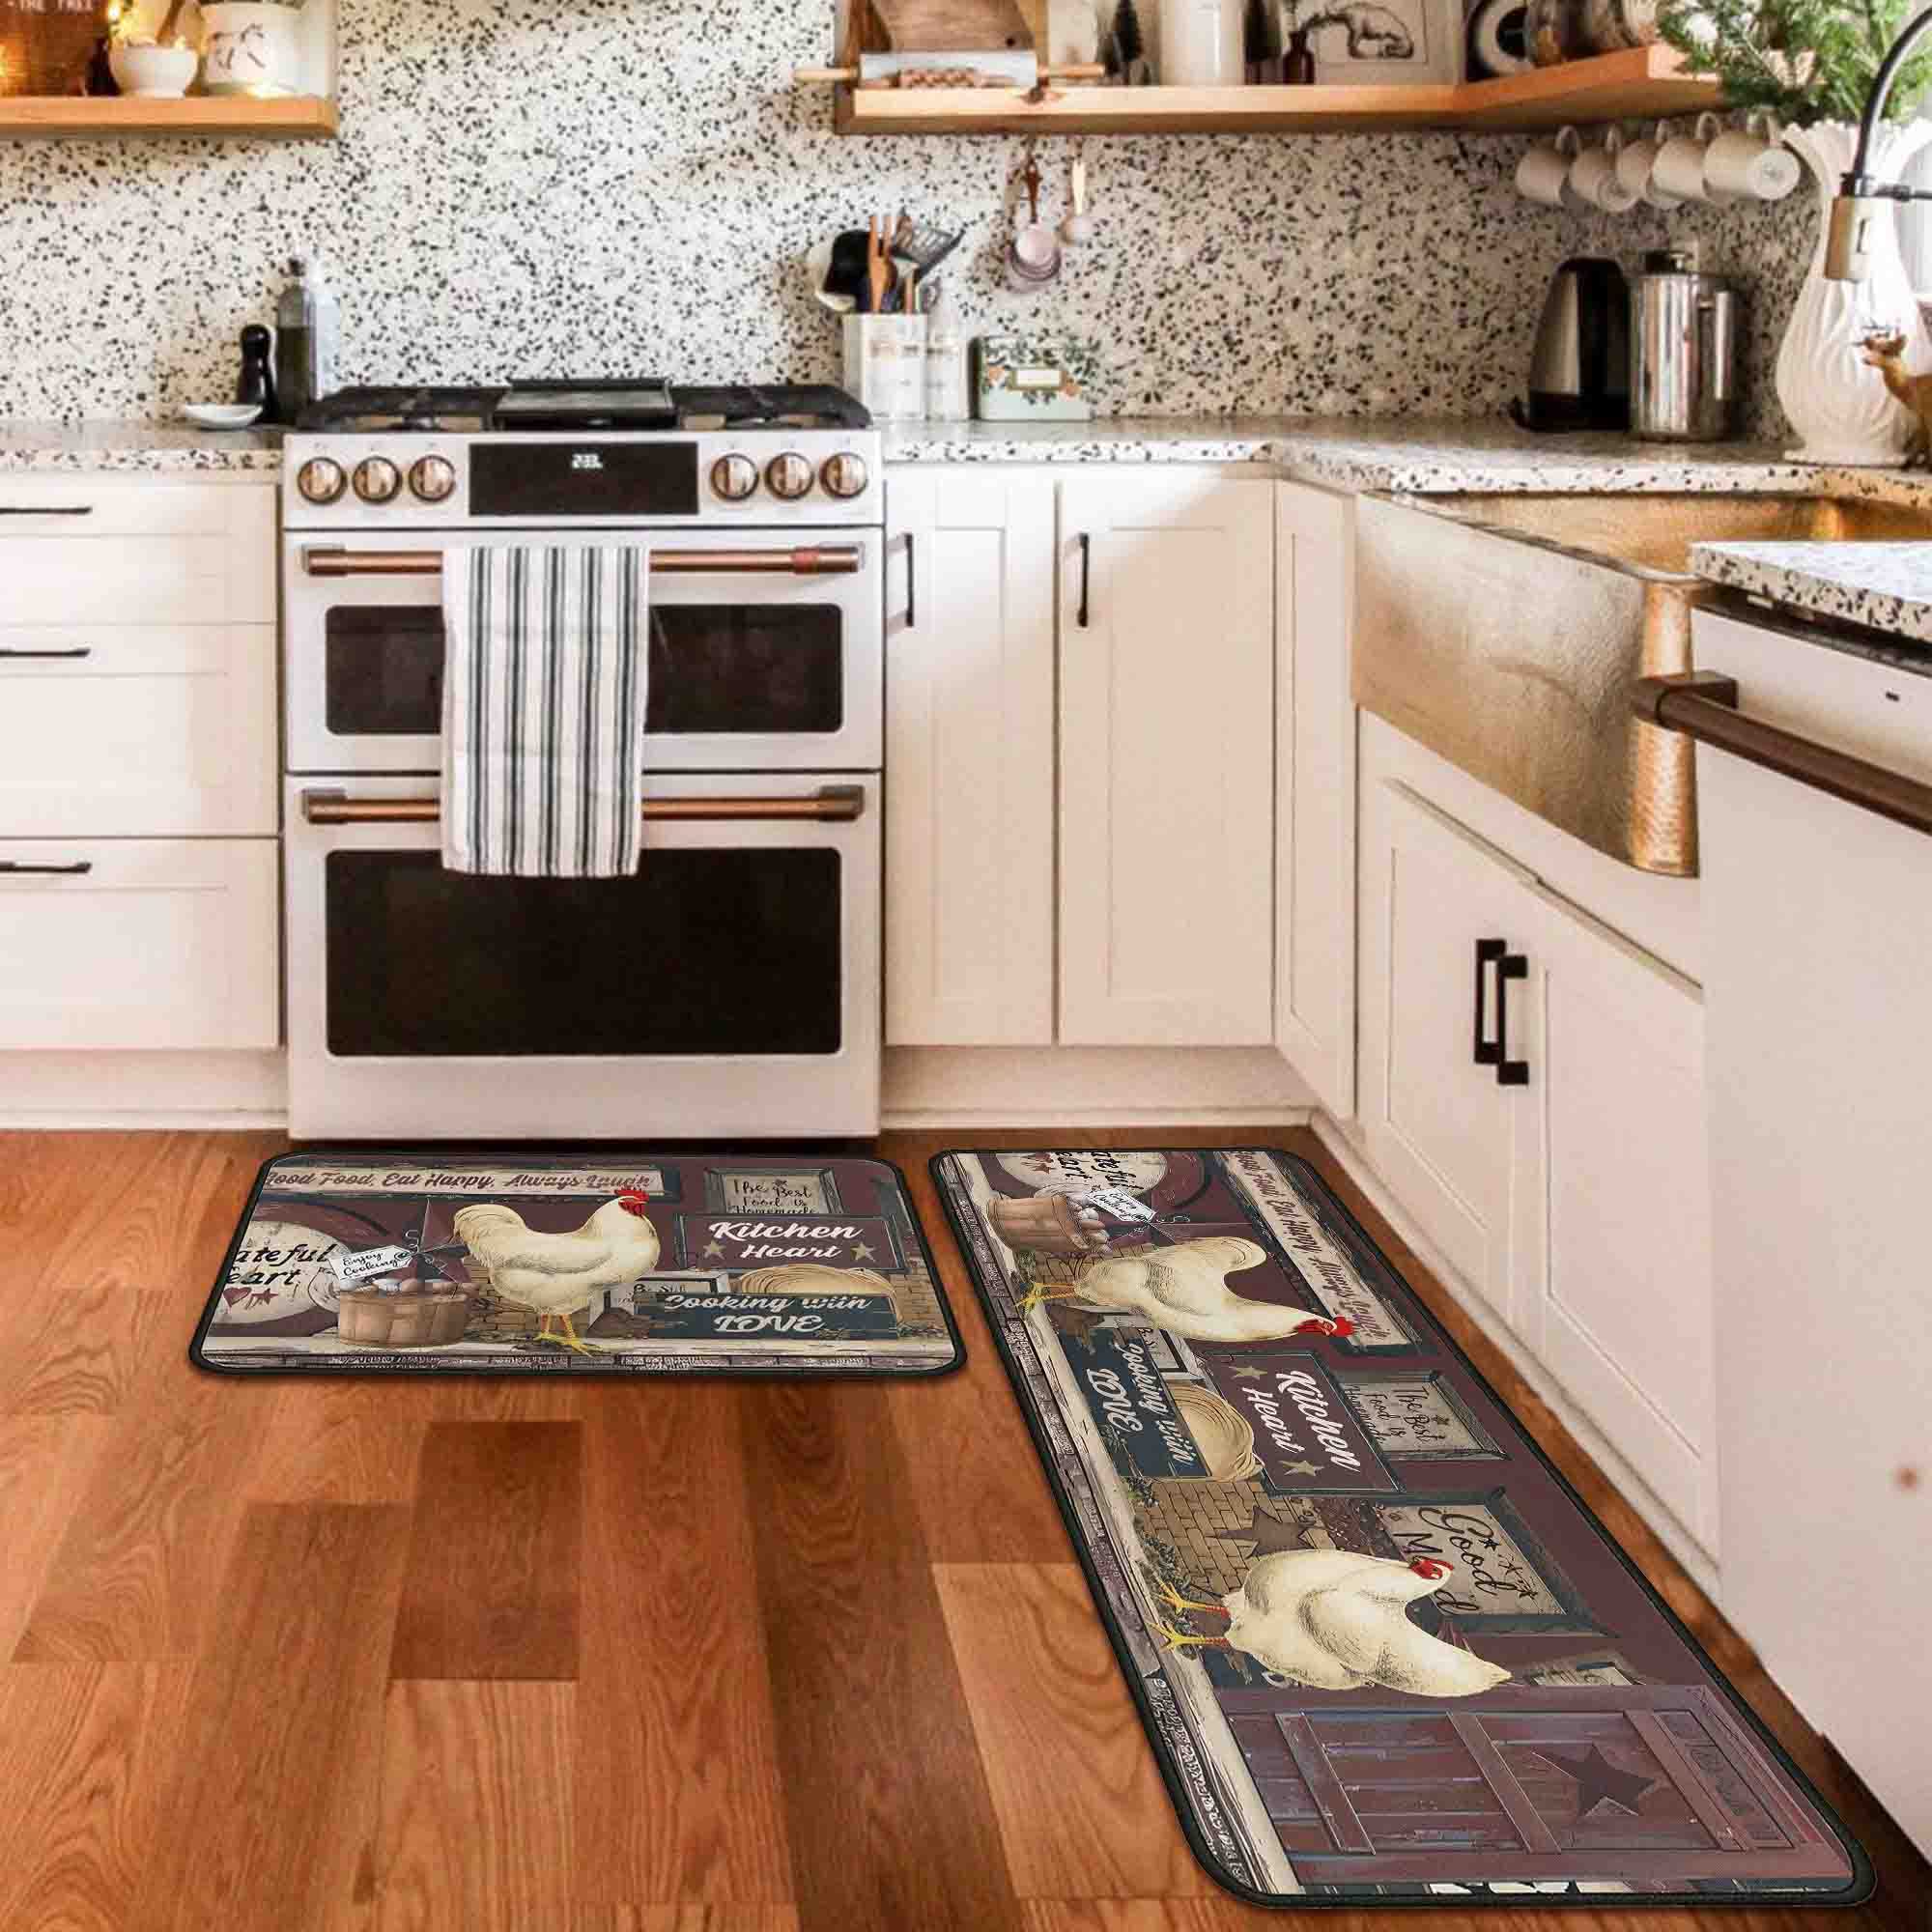 flippana Kitchen Rugs Farmhouse Style for Floor, Rooster Kitchen Rug, Non-Slip Backing Kitchen Mat Set of 2 Washable Kitchen Rug Sets with Runner for Home Kitchen 17"x47.2"+17"x30"